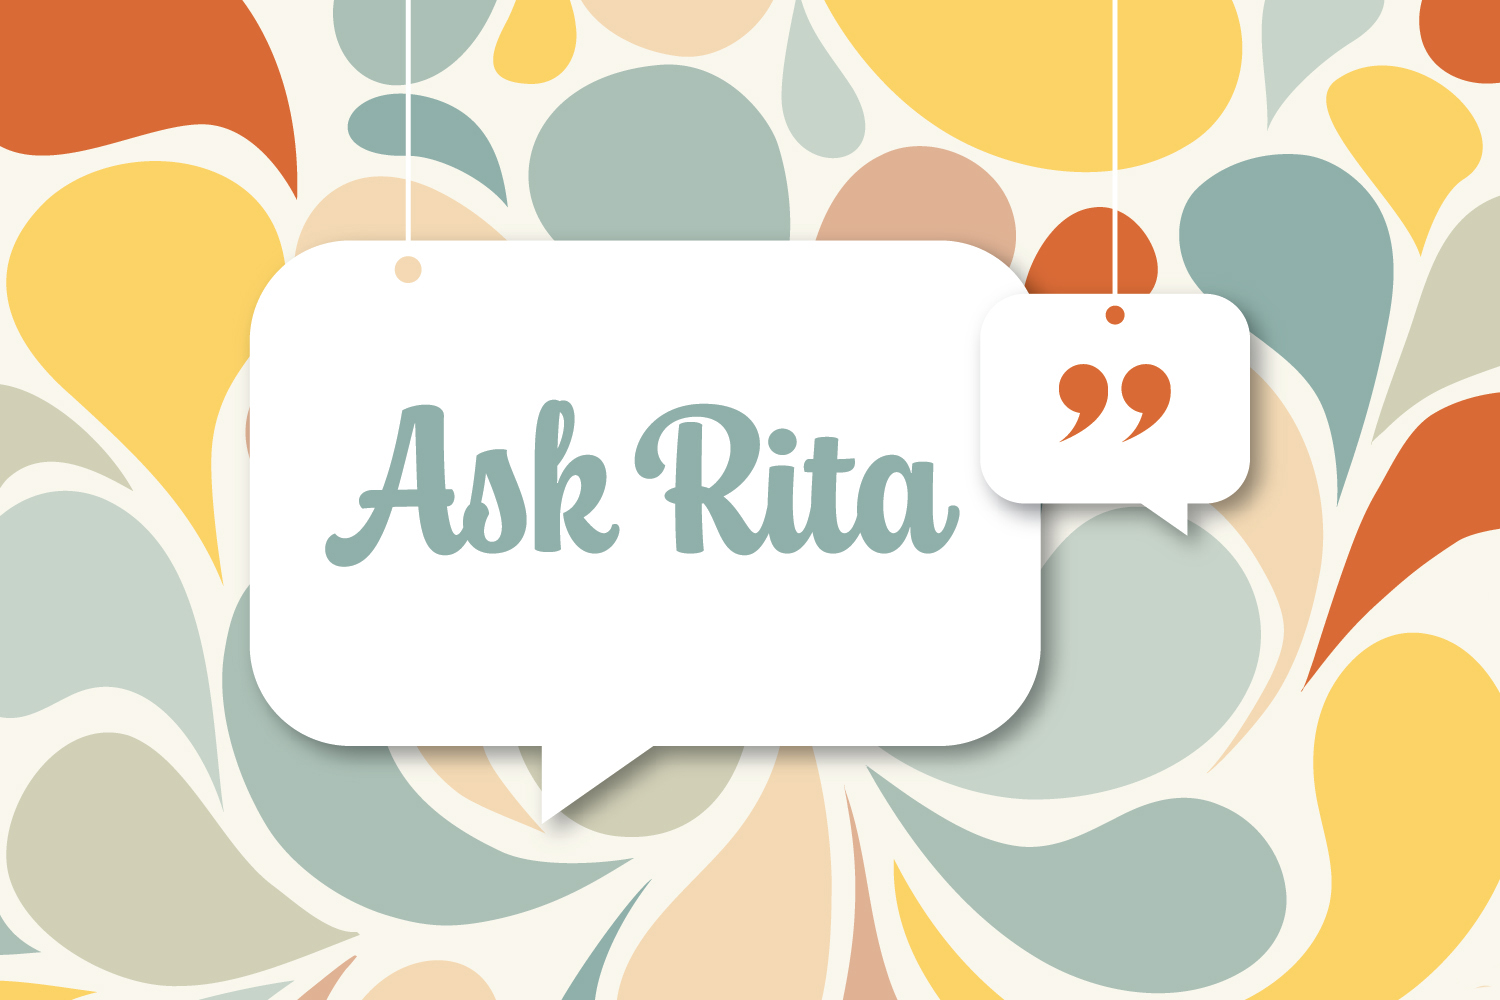 Ask Rita: The 2016 Federal Exempt Minimum Salary Rule—Gone, or on Pause?